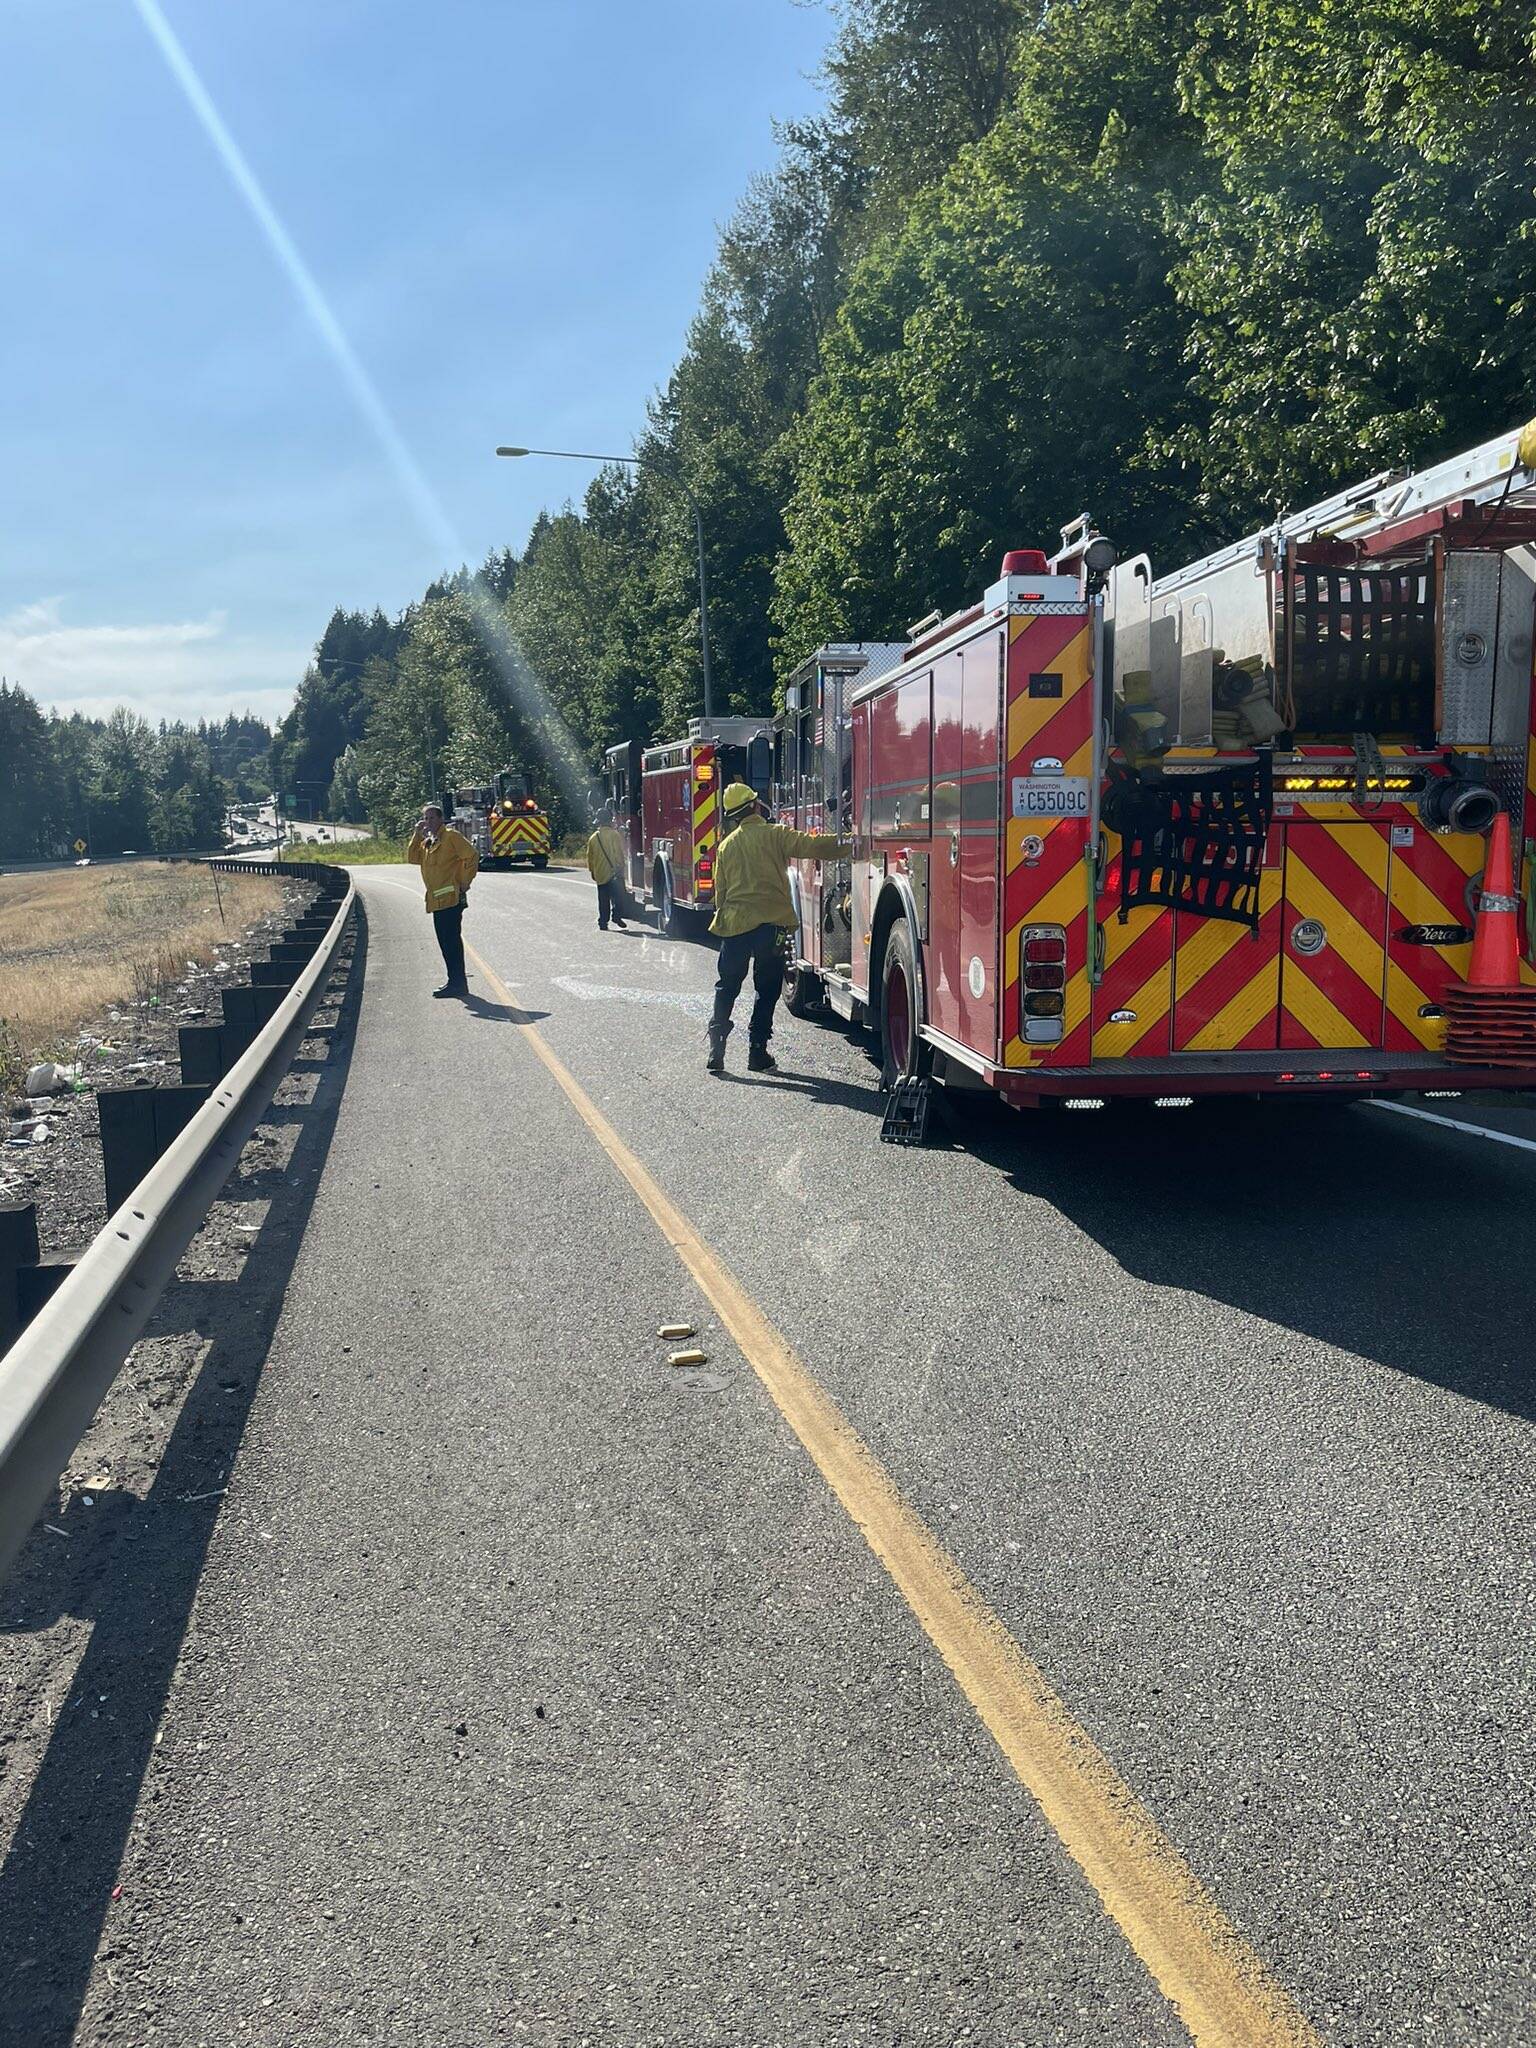 Officials temporarily shut down SR 18, west of SR 167, to traffic as a result of the brush fire. (Courtesy of the Renton Regional Fire Authority.)